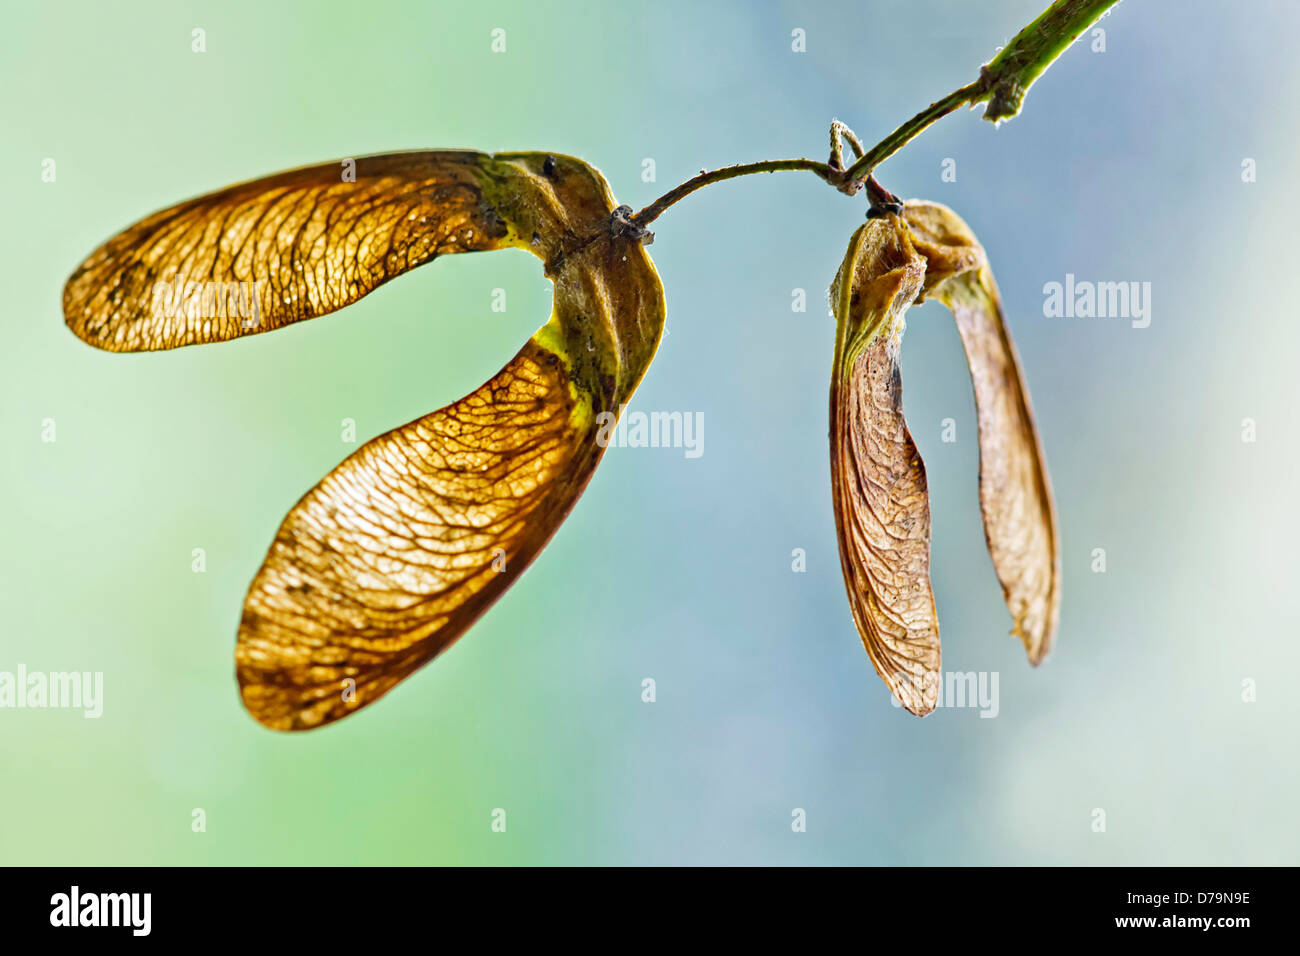 Close view of delicately veined winged seeds or keys of Sycamore, Acer pseudoplatanus. Stock Photo